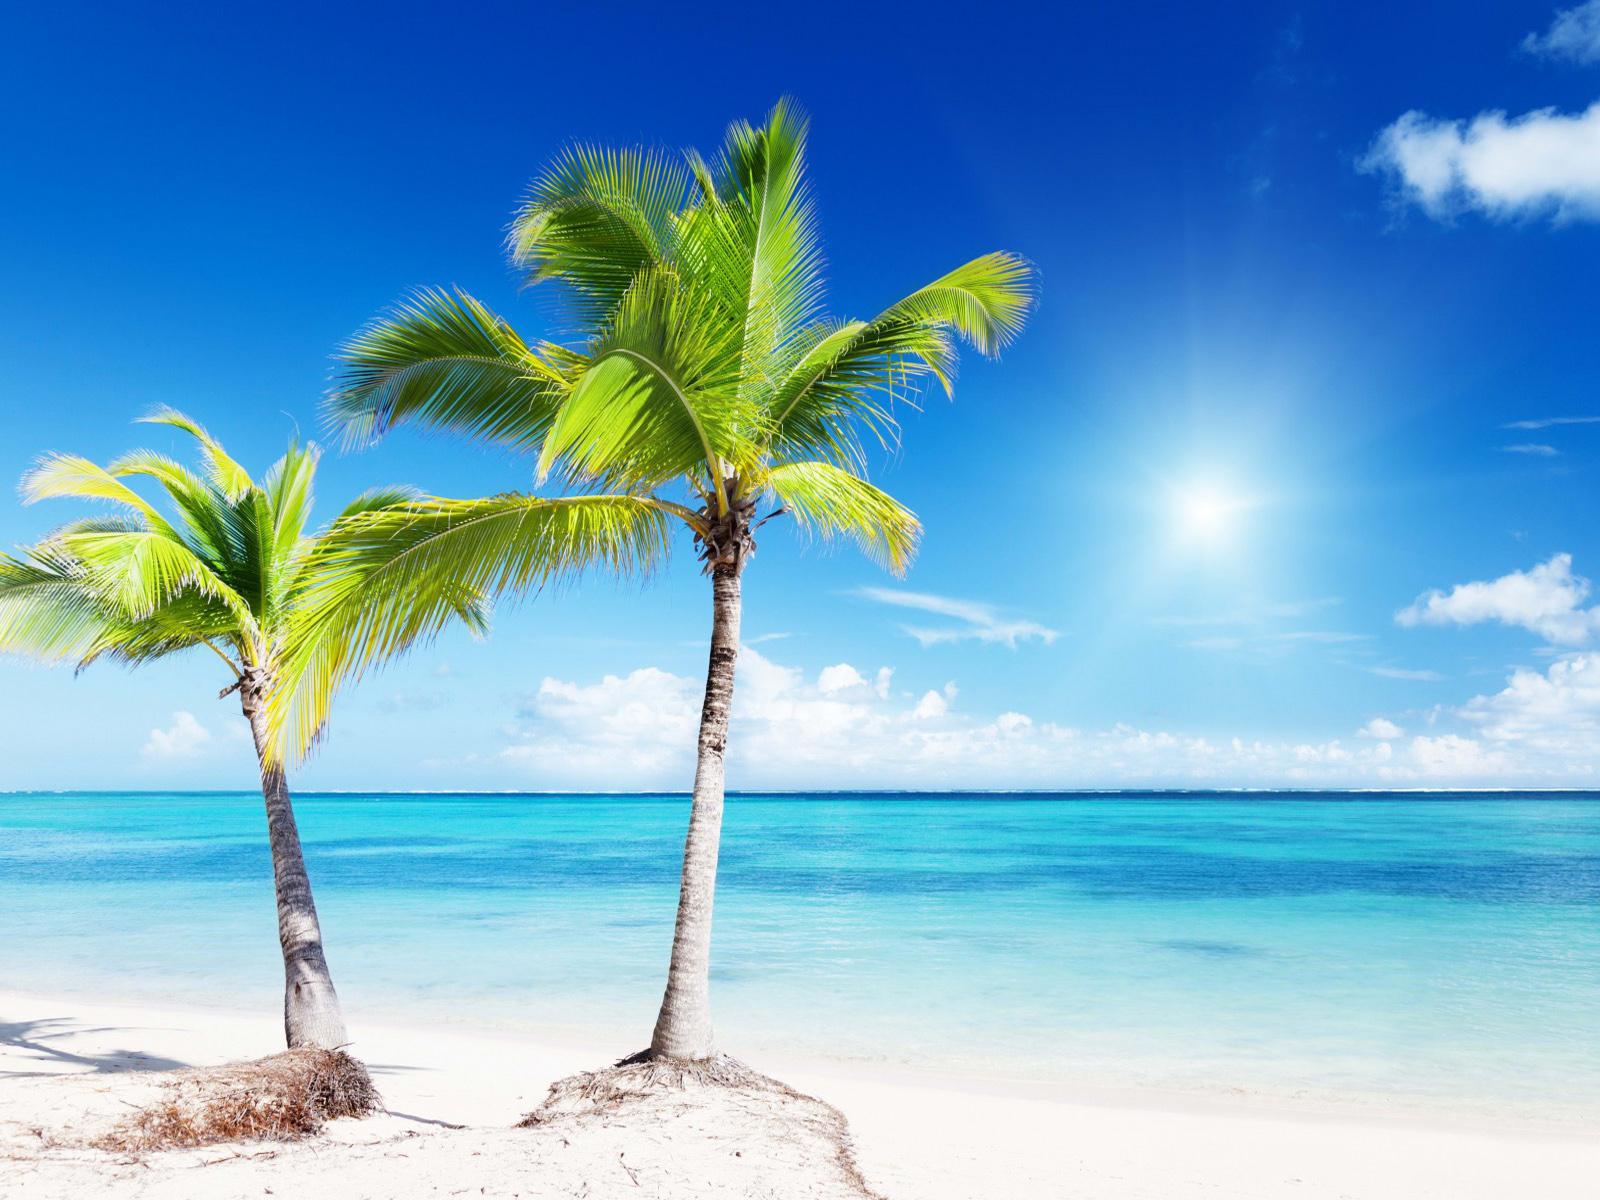 Tropical Beaches With Palm Trees HD Wallpaper, Background Images